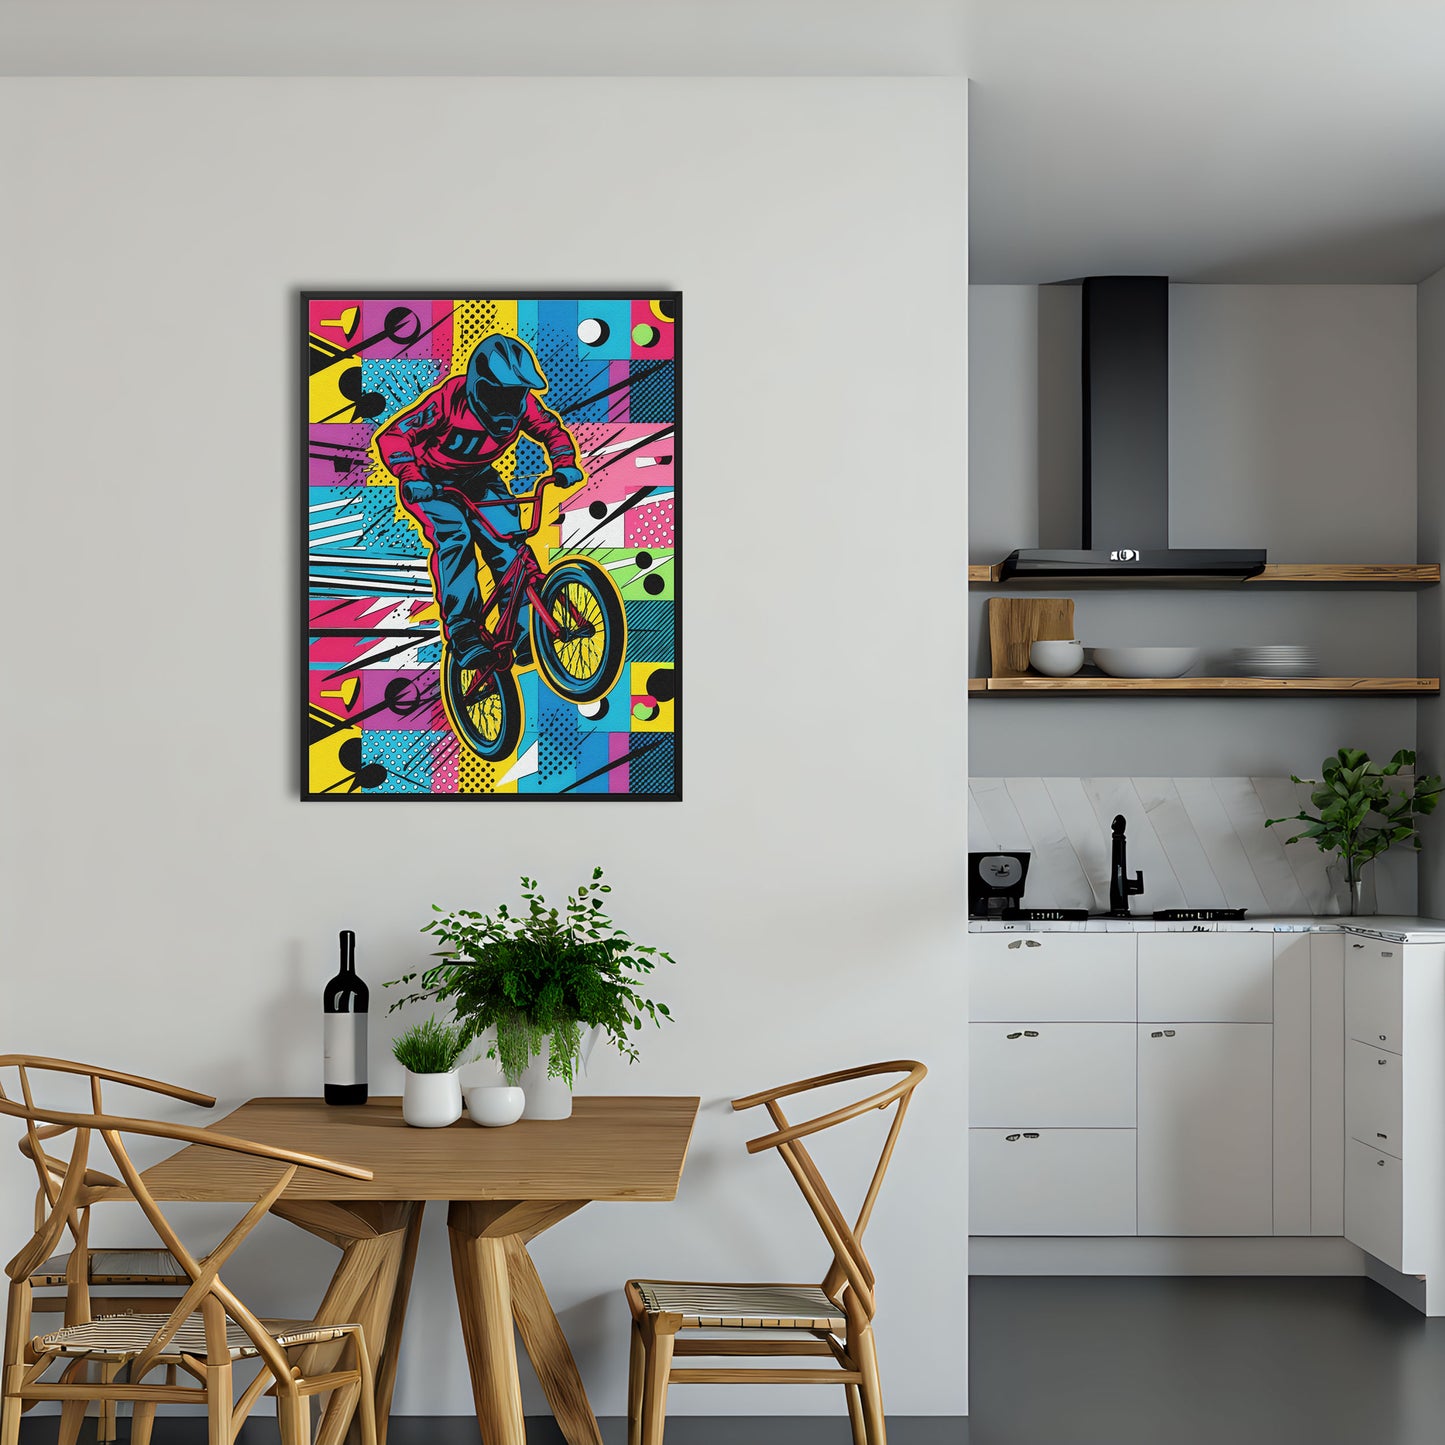 Air is an original and exclusive contemporary pop art, luxury artwork print. It's Giclée printed on to a finely textured 400gsm artist-grade cotton canvas and stretched over 38mm solid wood artist stretcher bars. Image 5.